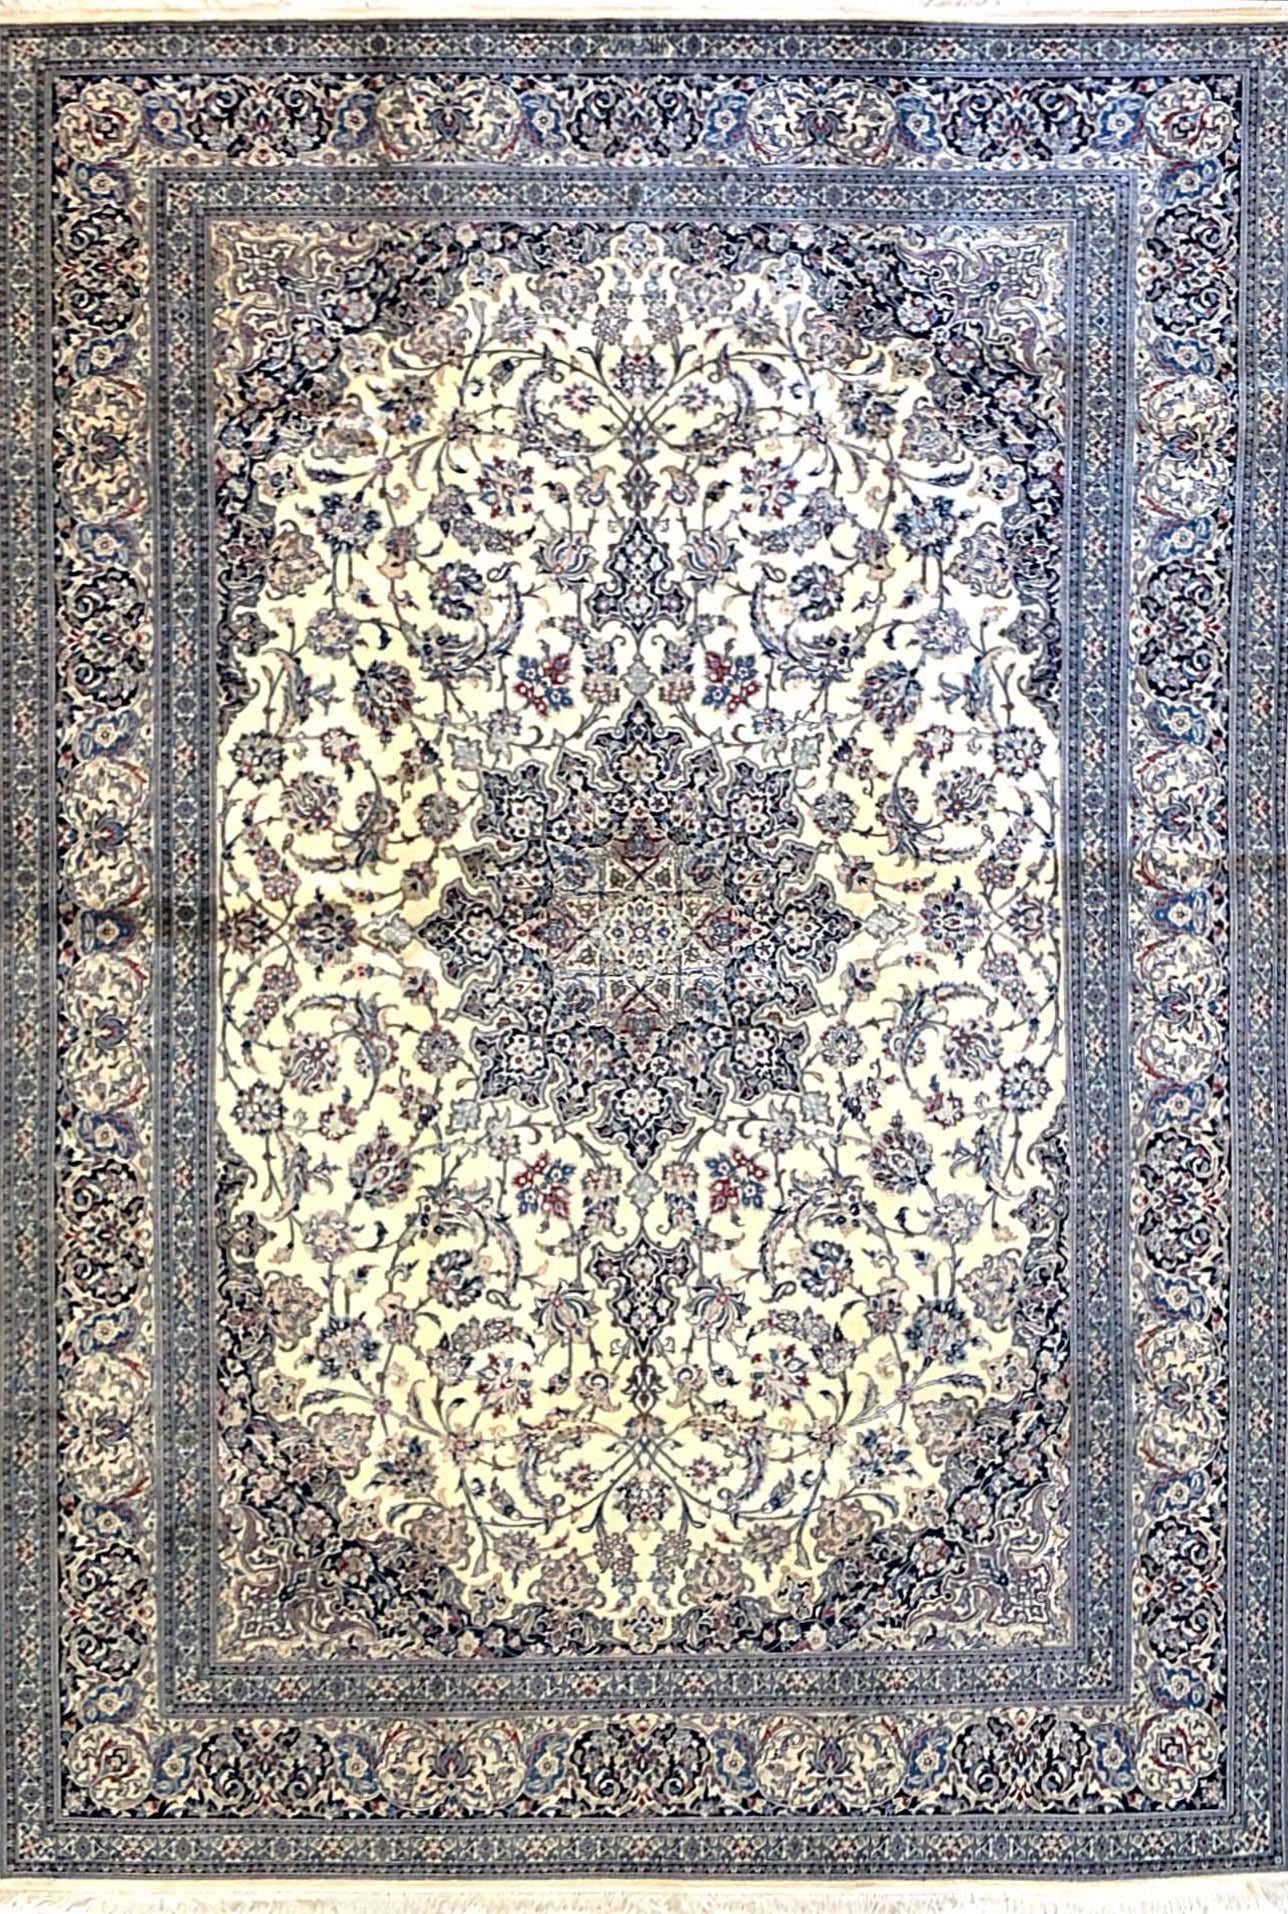 This handmade rug is an extremely fine and precise piece with high quality, made in the workshops in Nain city in Iran. This piece has wool and silk pile with cotton foundation. Nain is a city in Iran that is well known for producing fine handmade